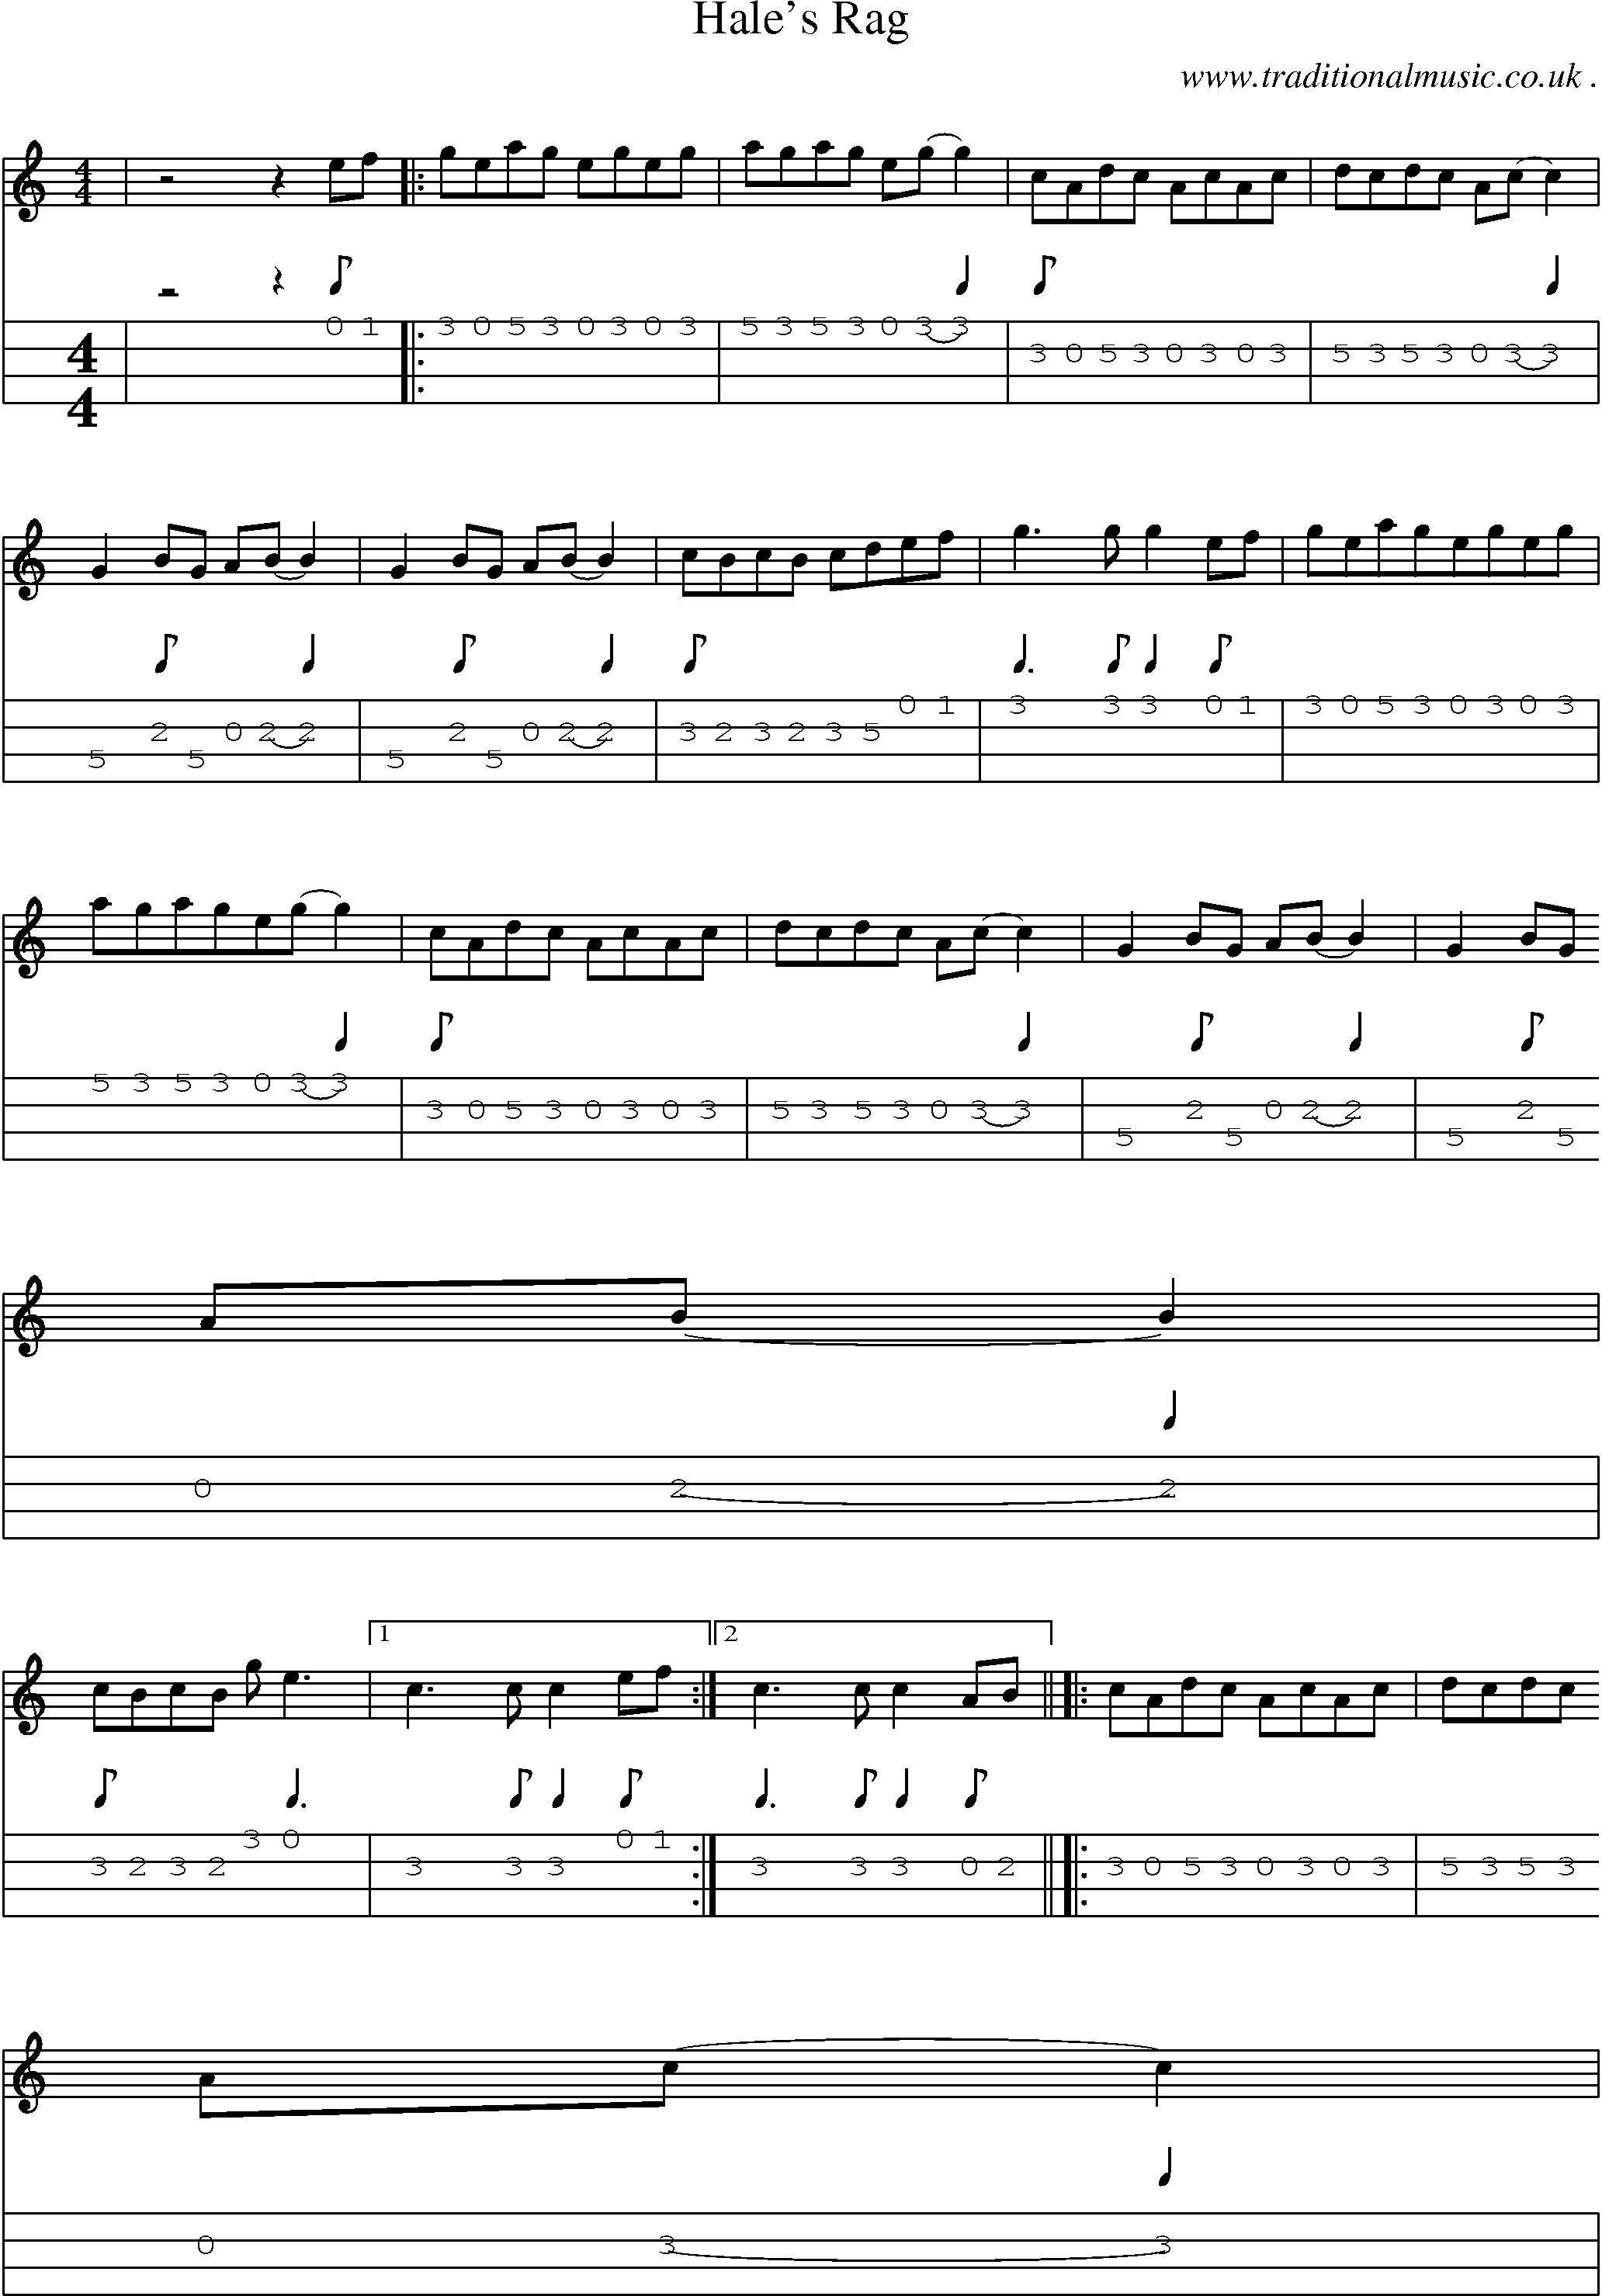 Music Score and Guitar Tabs for Hales Rag